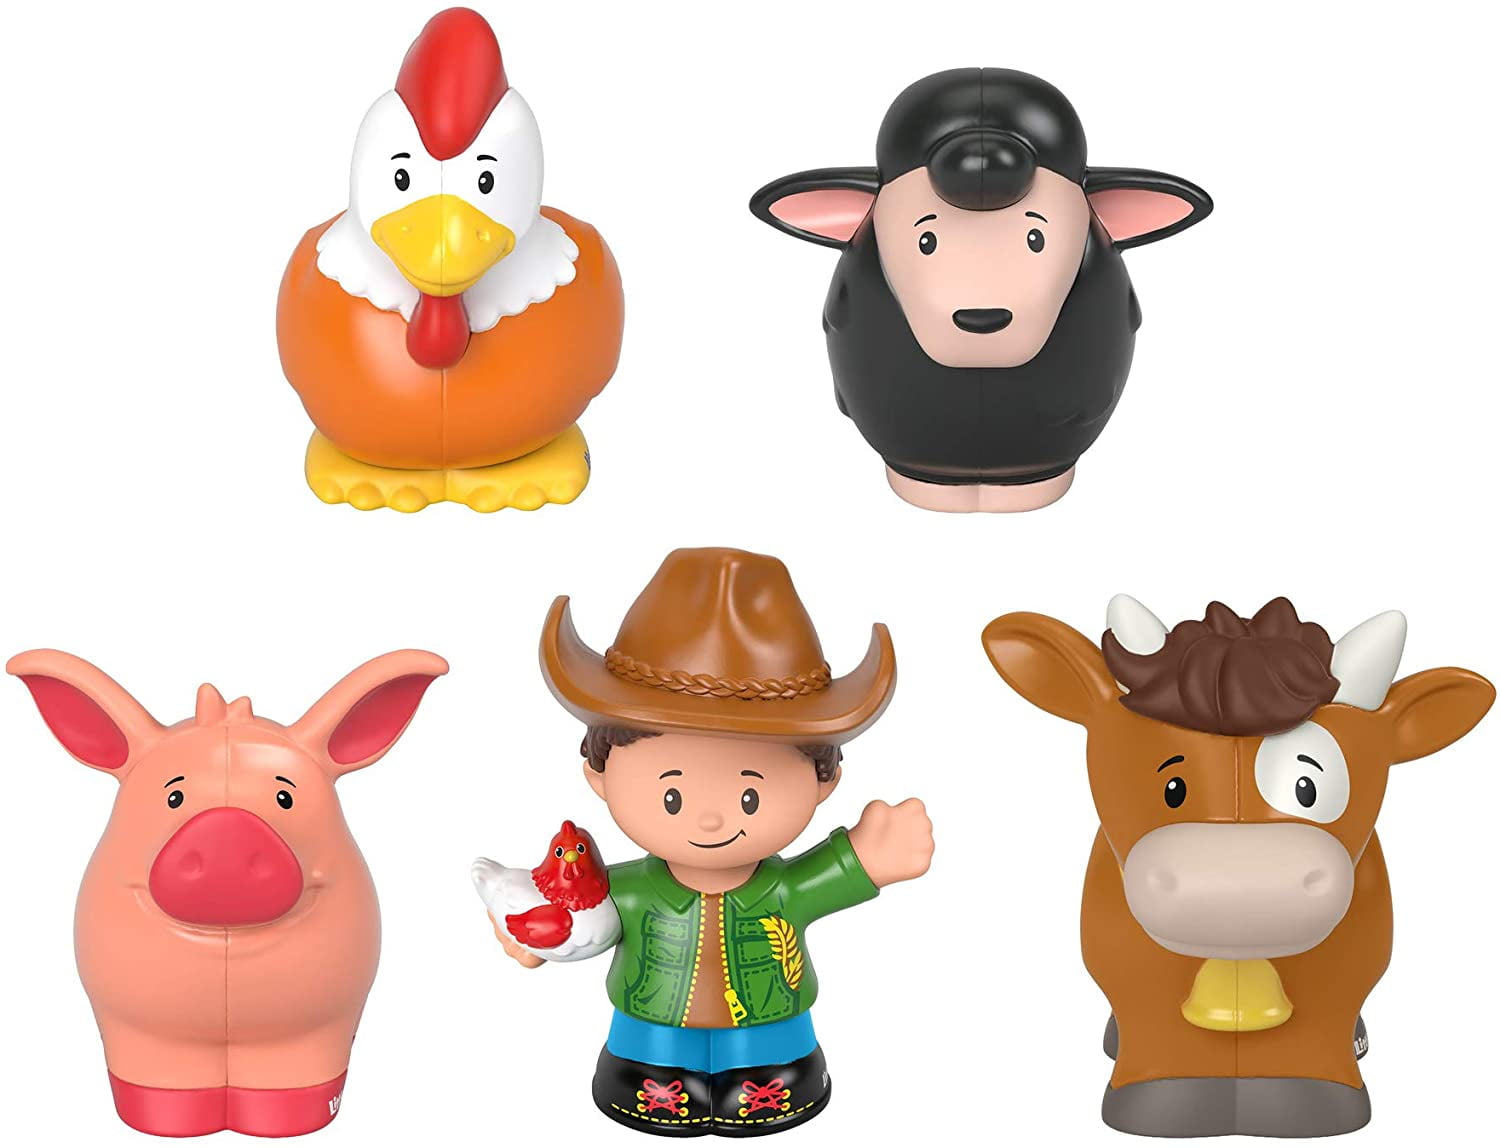 6 PCS PVC People Figurines Ranch Farmer Model Playset Kids Toy Collectibles 